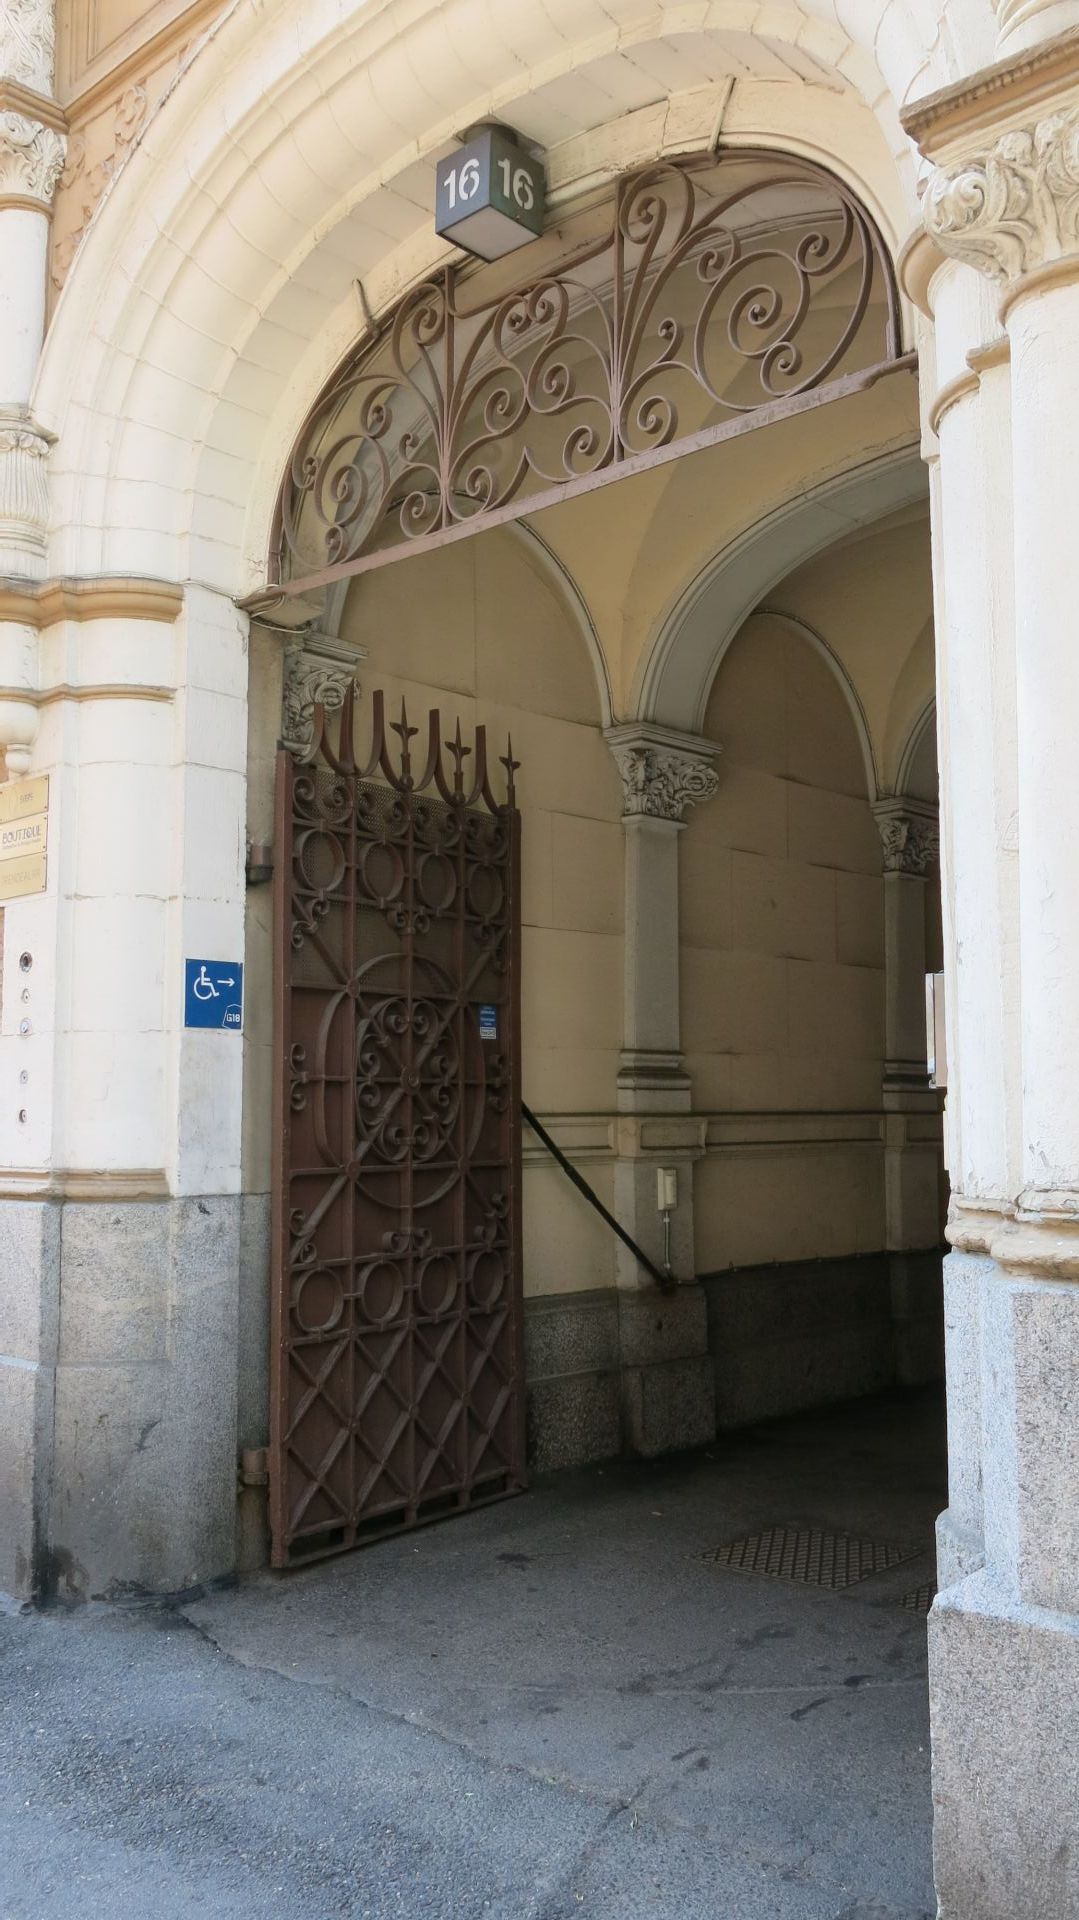 Accessible entrance gate to the building. The gate is located at Yrjönkatu 16.